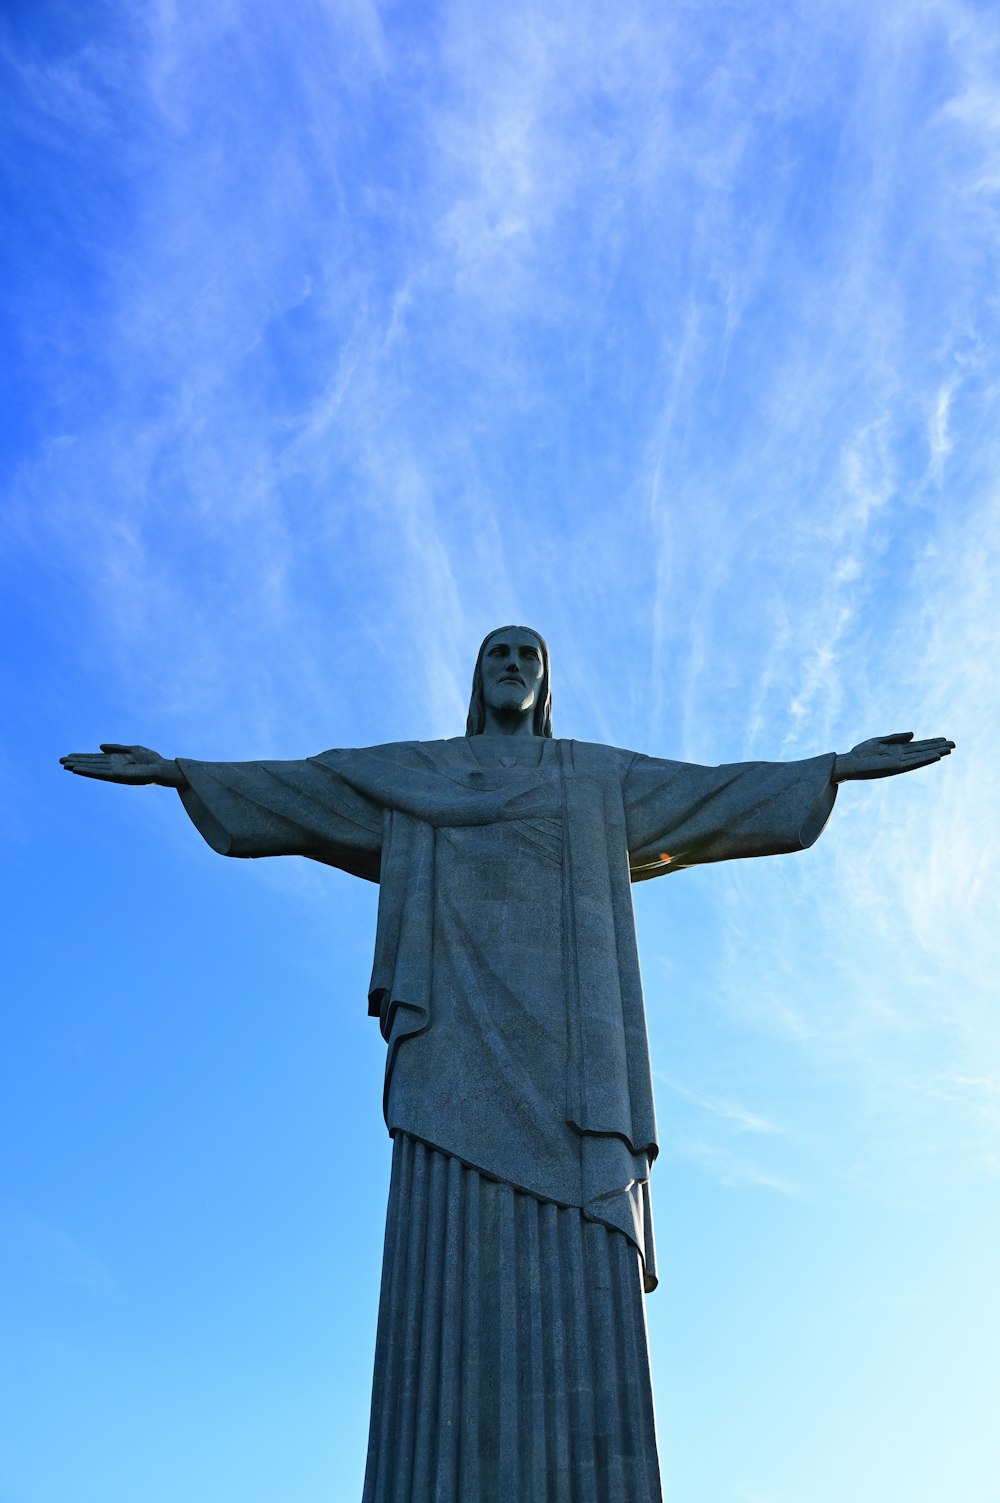 the statue of christ stands in front of a blue sky